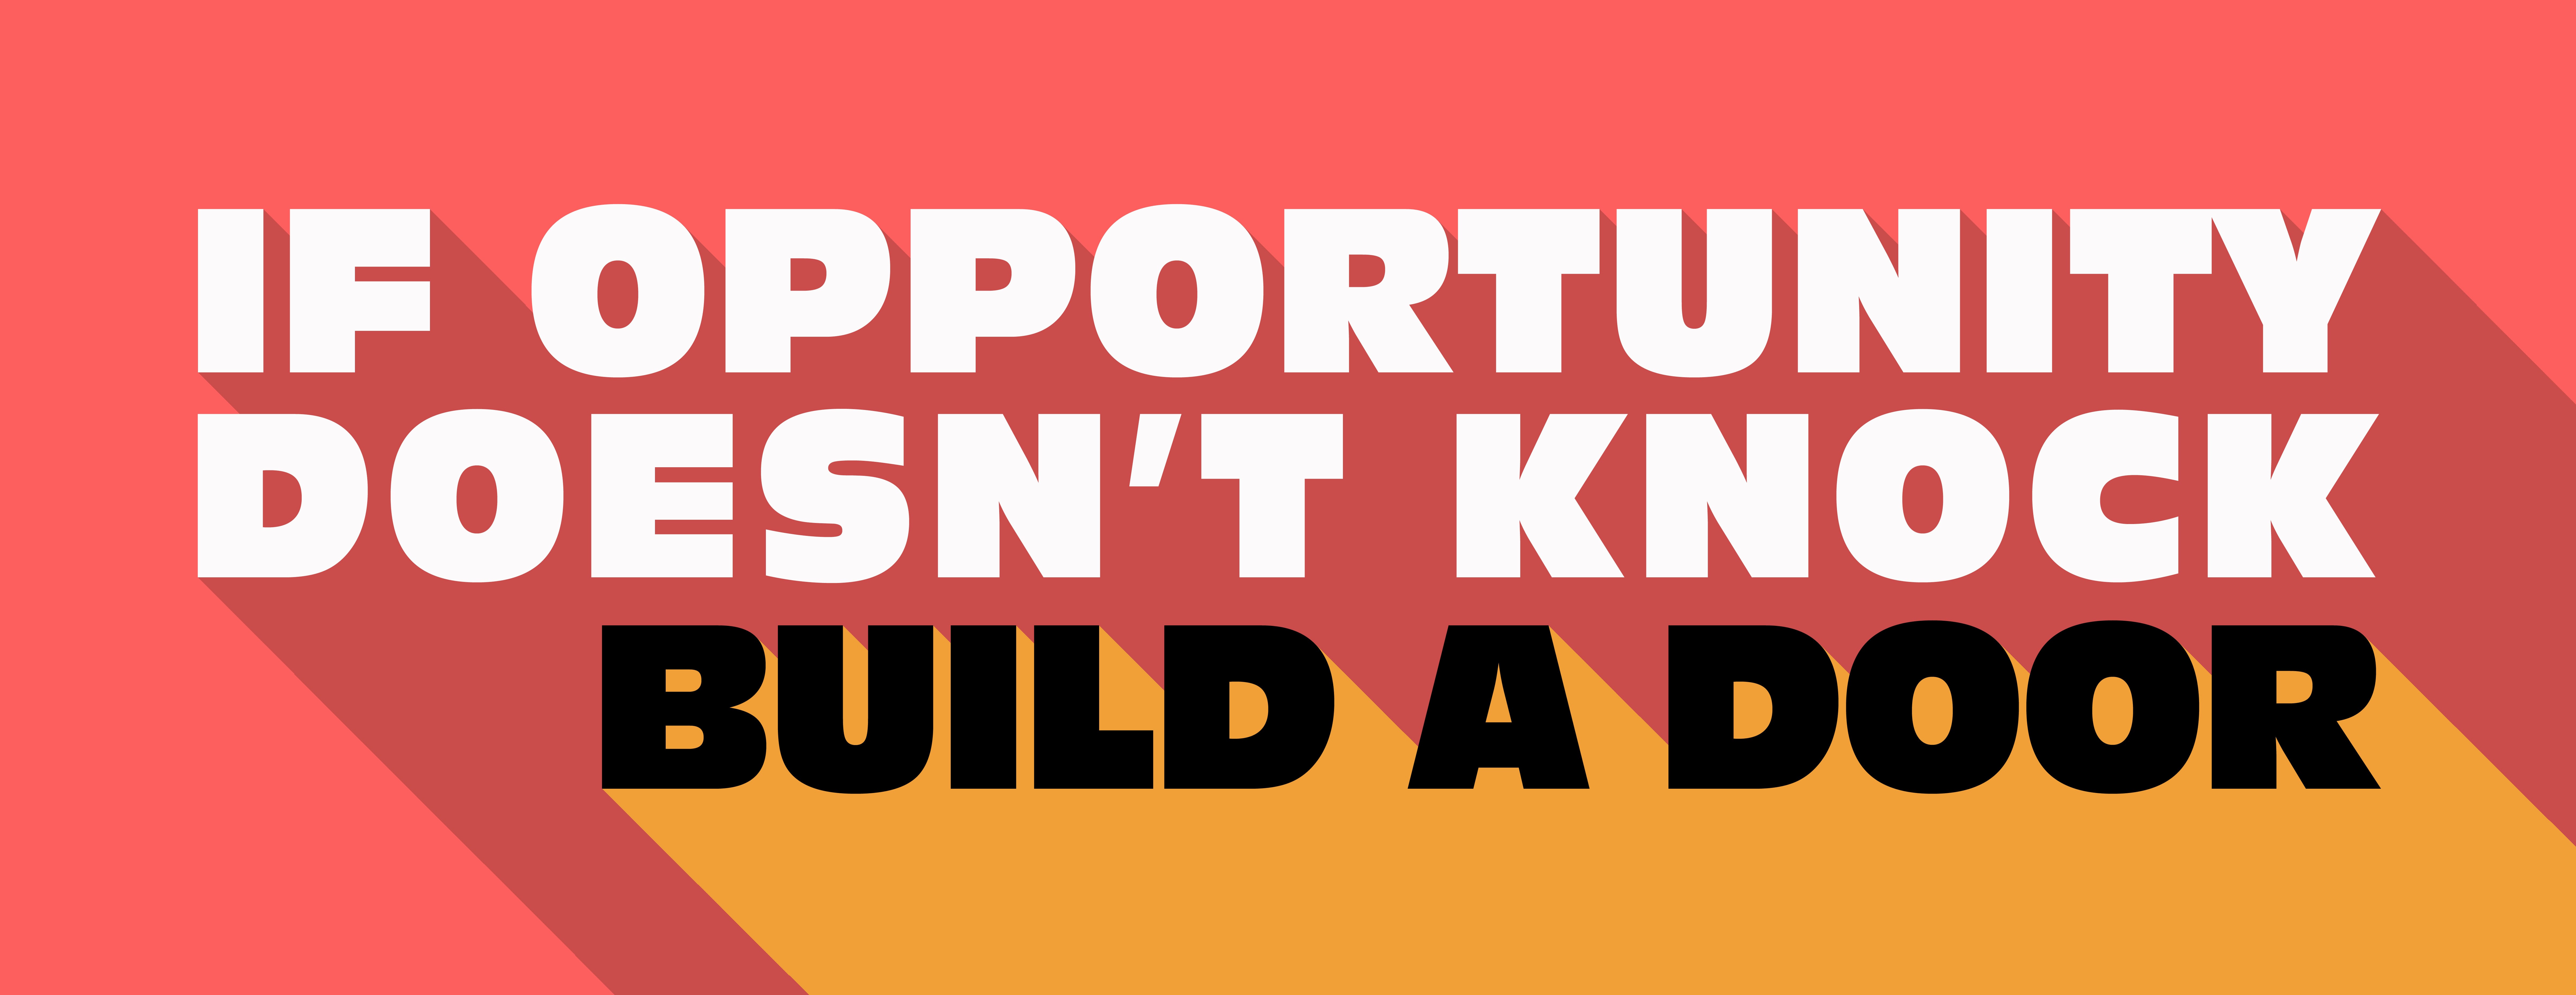 Message saying If Opportunity Doesn't Knock Build a Door.